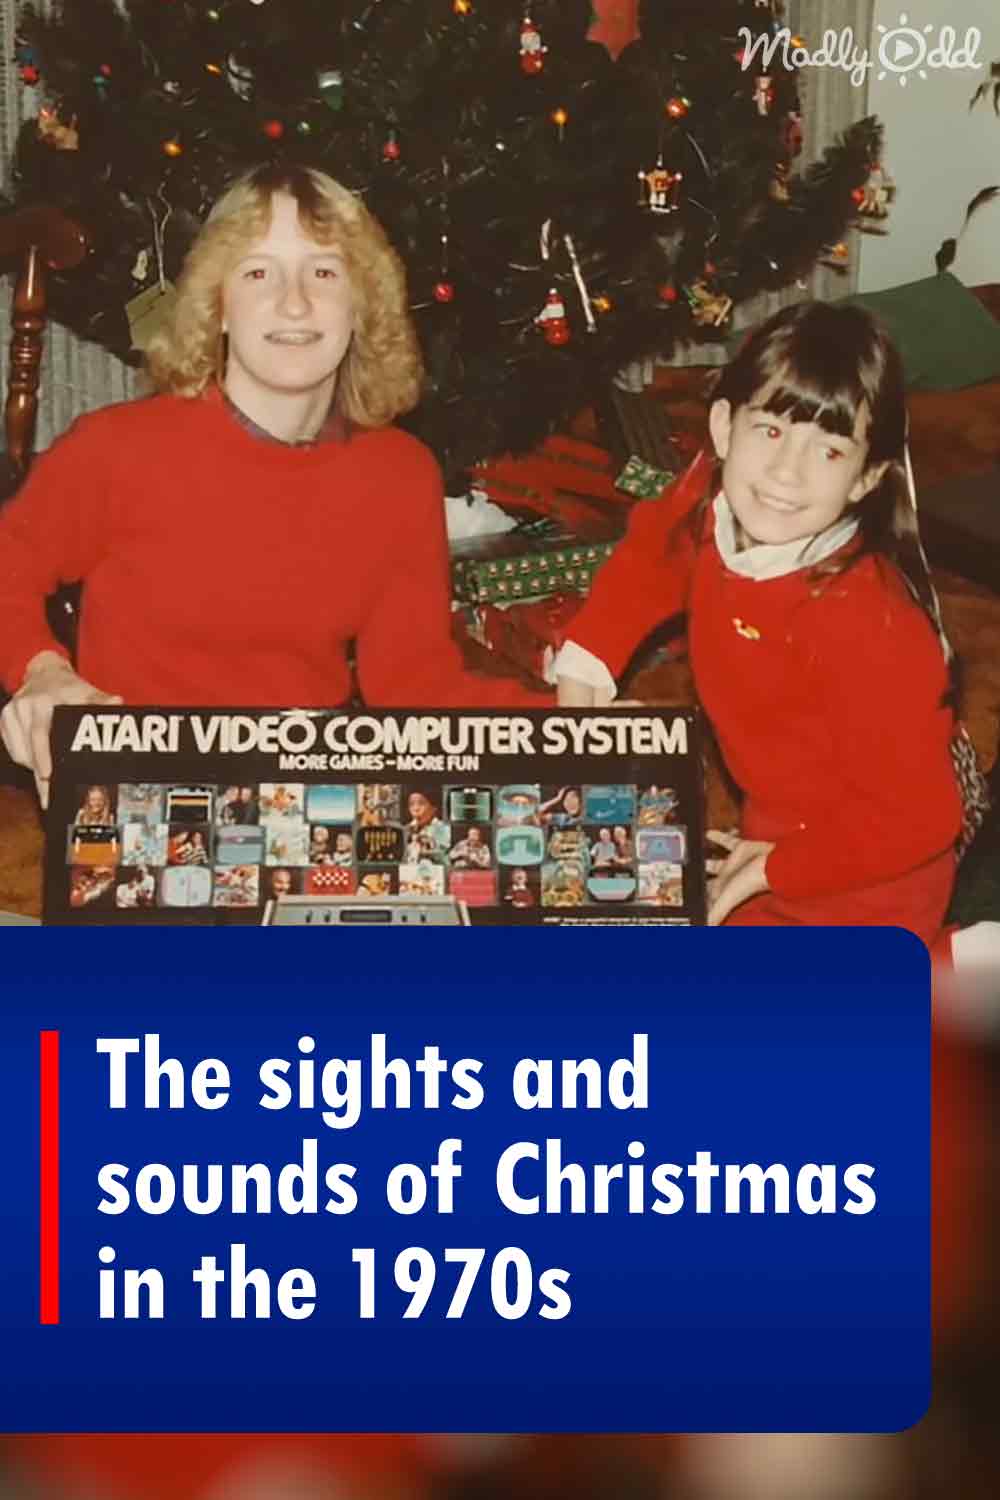 The sights and sounds of Christmas in the 1970s